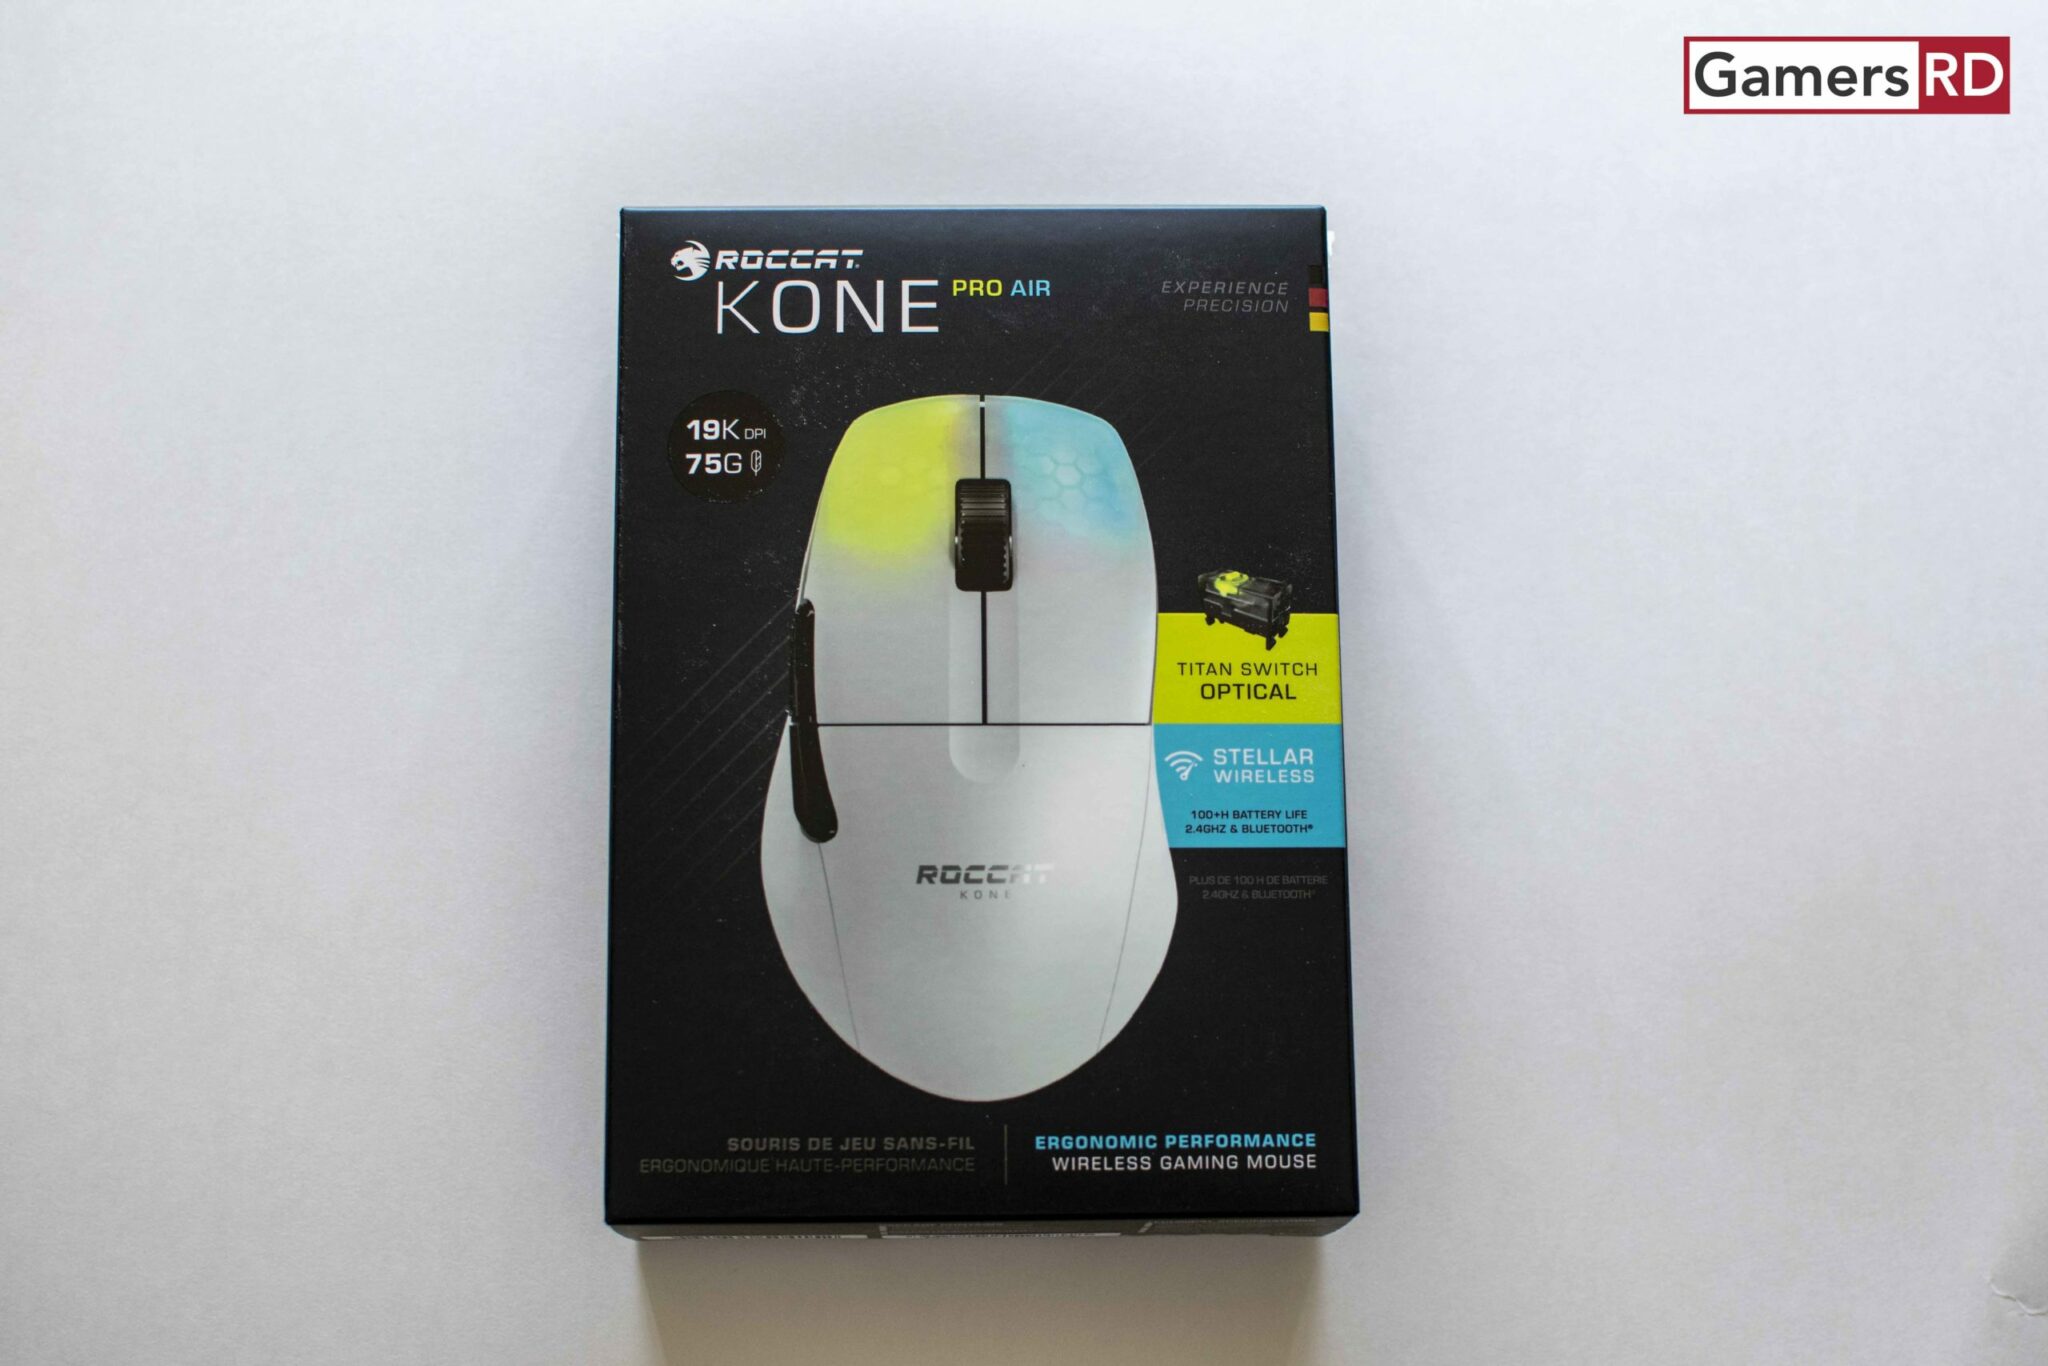 ROCCAT Kone Pro Air Gaming Mouse Review, GamersRD